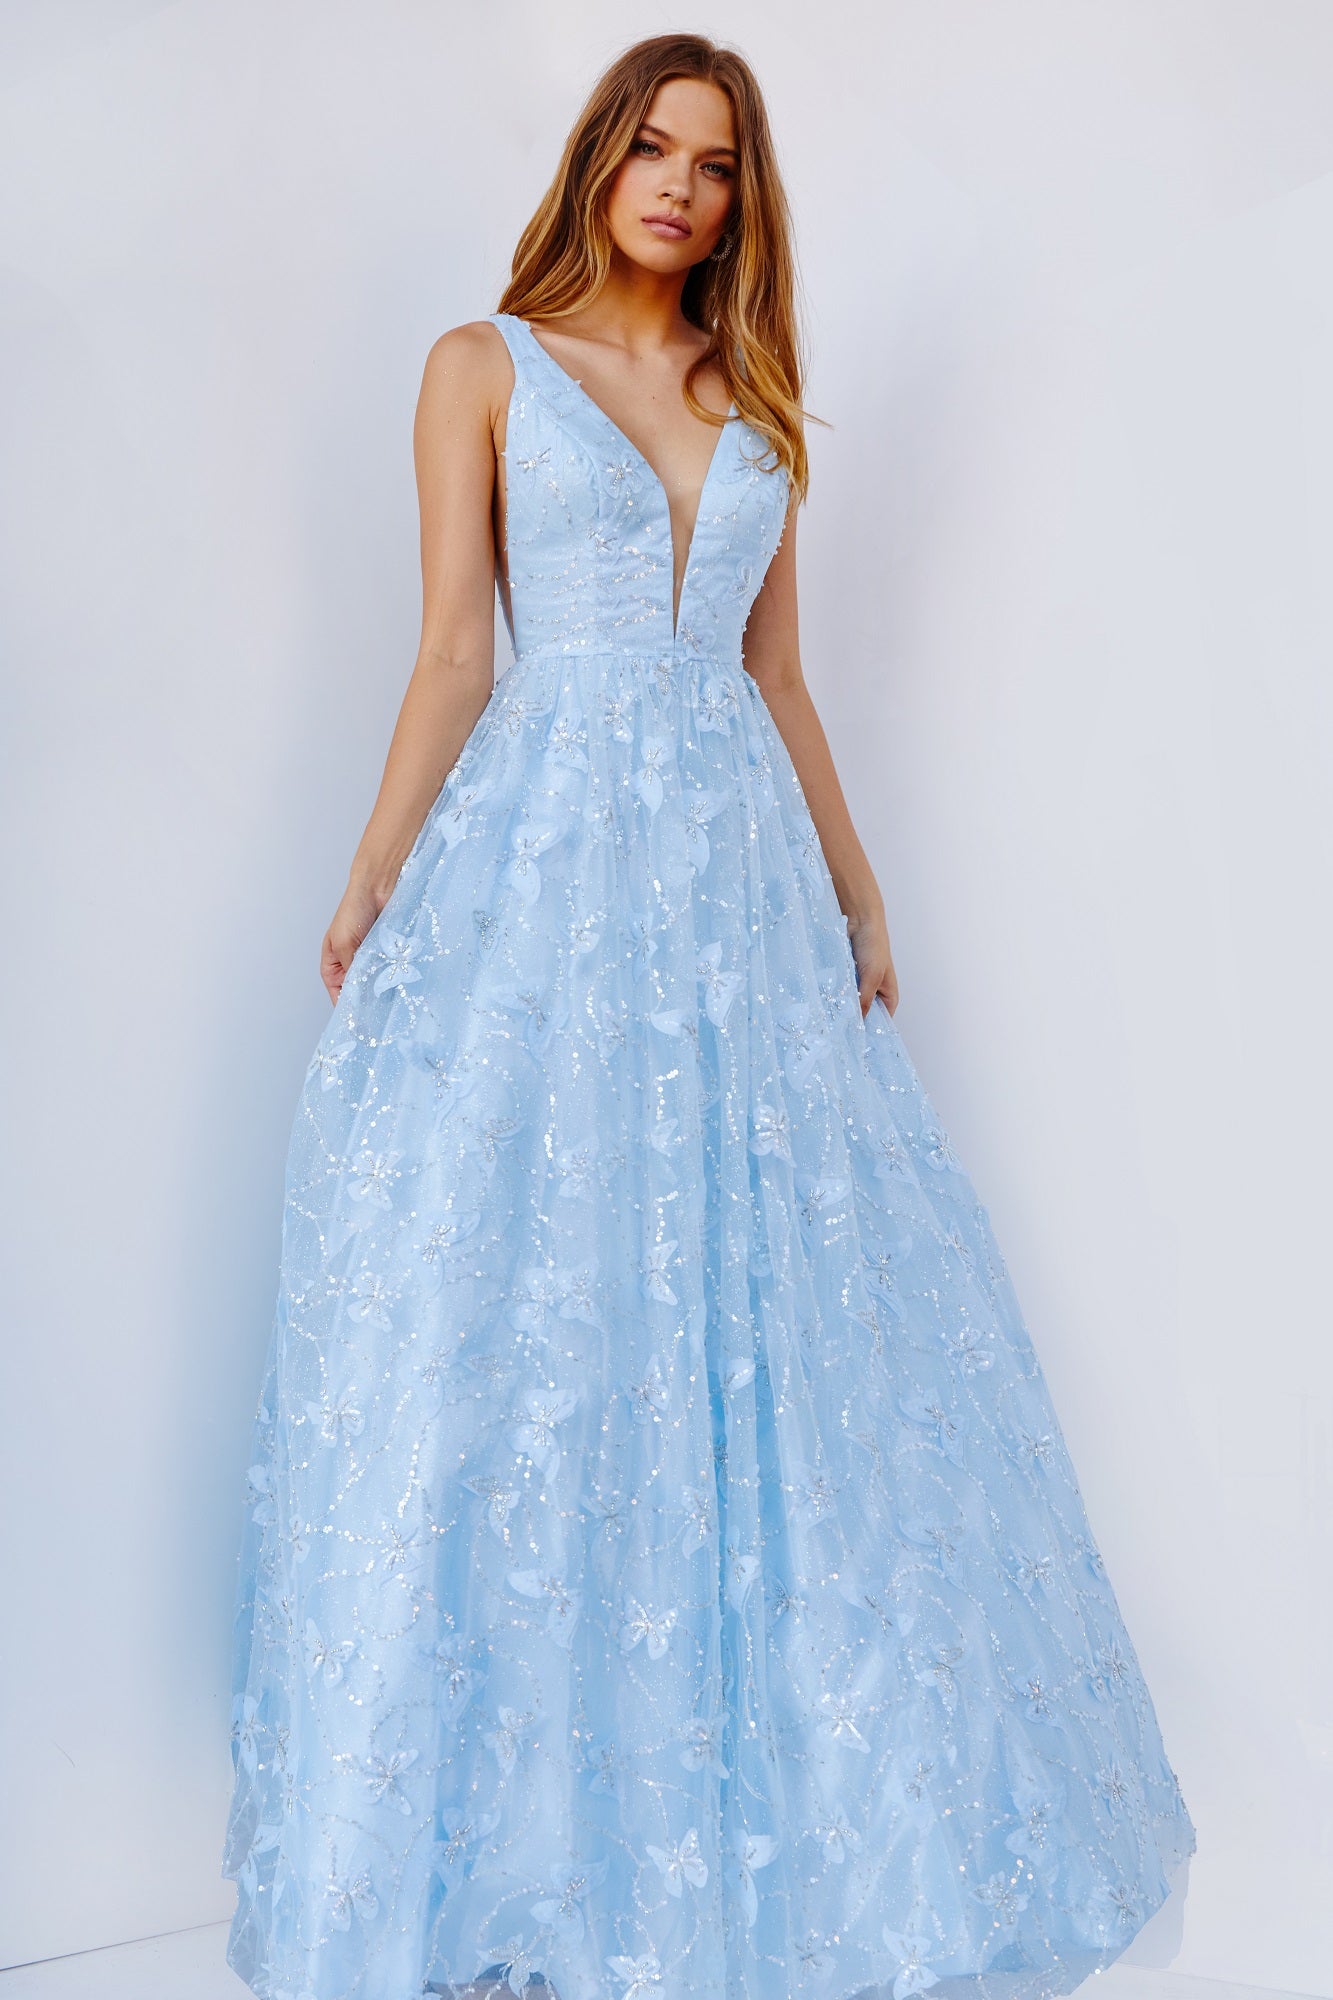 JVN24182 Lace Butterflies Prom Dress A line Plunging V Neckline with Panel Wide Straps and V back